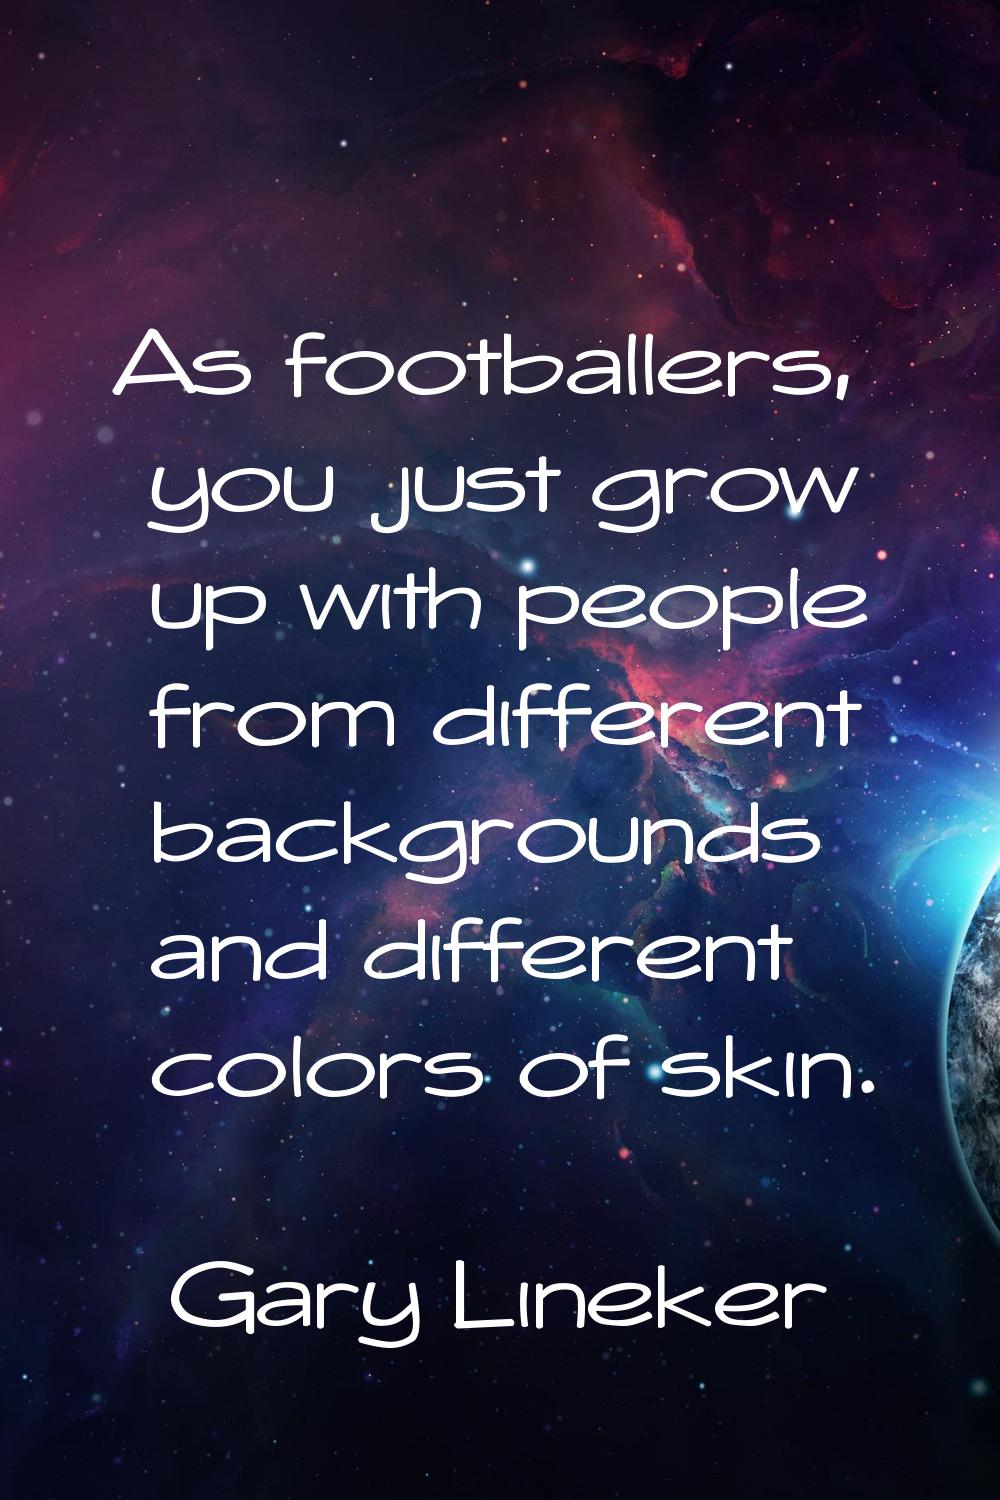 As footballers, you just grow up with people from different backgrounds and different colors of ski